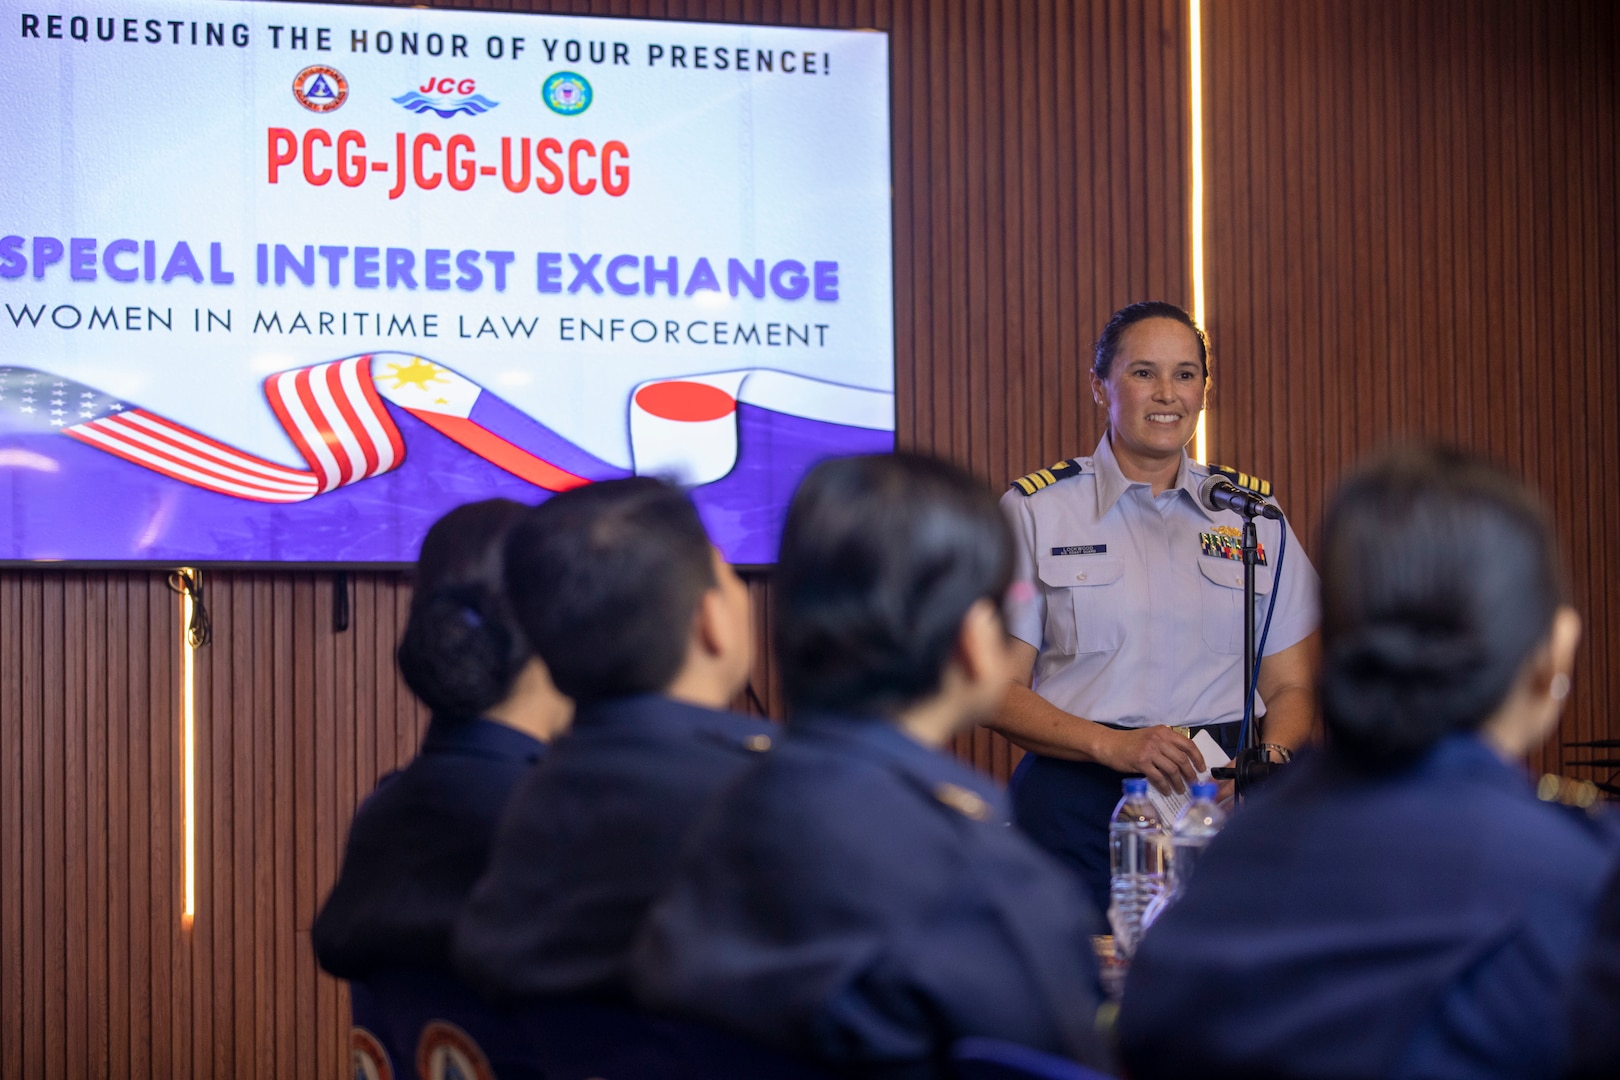 Cmdr. Amy Lockwood, executive officer of U.S. Coast Guard Cutter Stratton (WMSL 752), speaks to members of the U.S., Japan, and Philippines coast guards at a special interest exchange focused on women in maritime law enforcement held in Manila, Philippines, June 3, 2023. Stratton deployed to the Western Pacific under U.S. Navy 7th Fleet command to serve as a non-escalatory asset for the promotion of a rules-based order in the maritime domain by engaging with partner nations and allies in the region. (U.S. Navy photo by Chief Petty Officer Brett Cote)